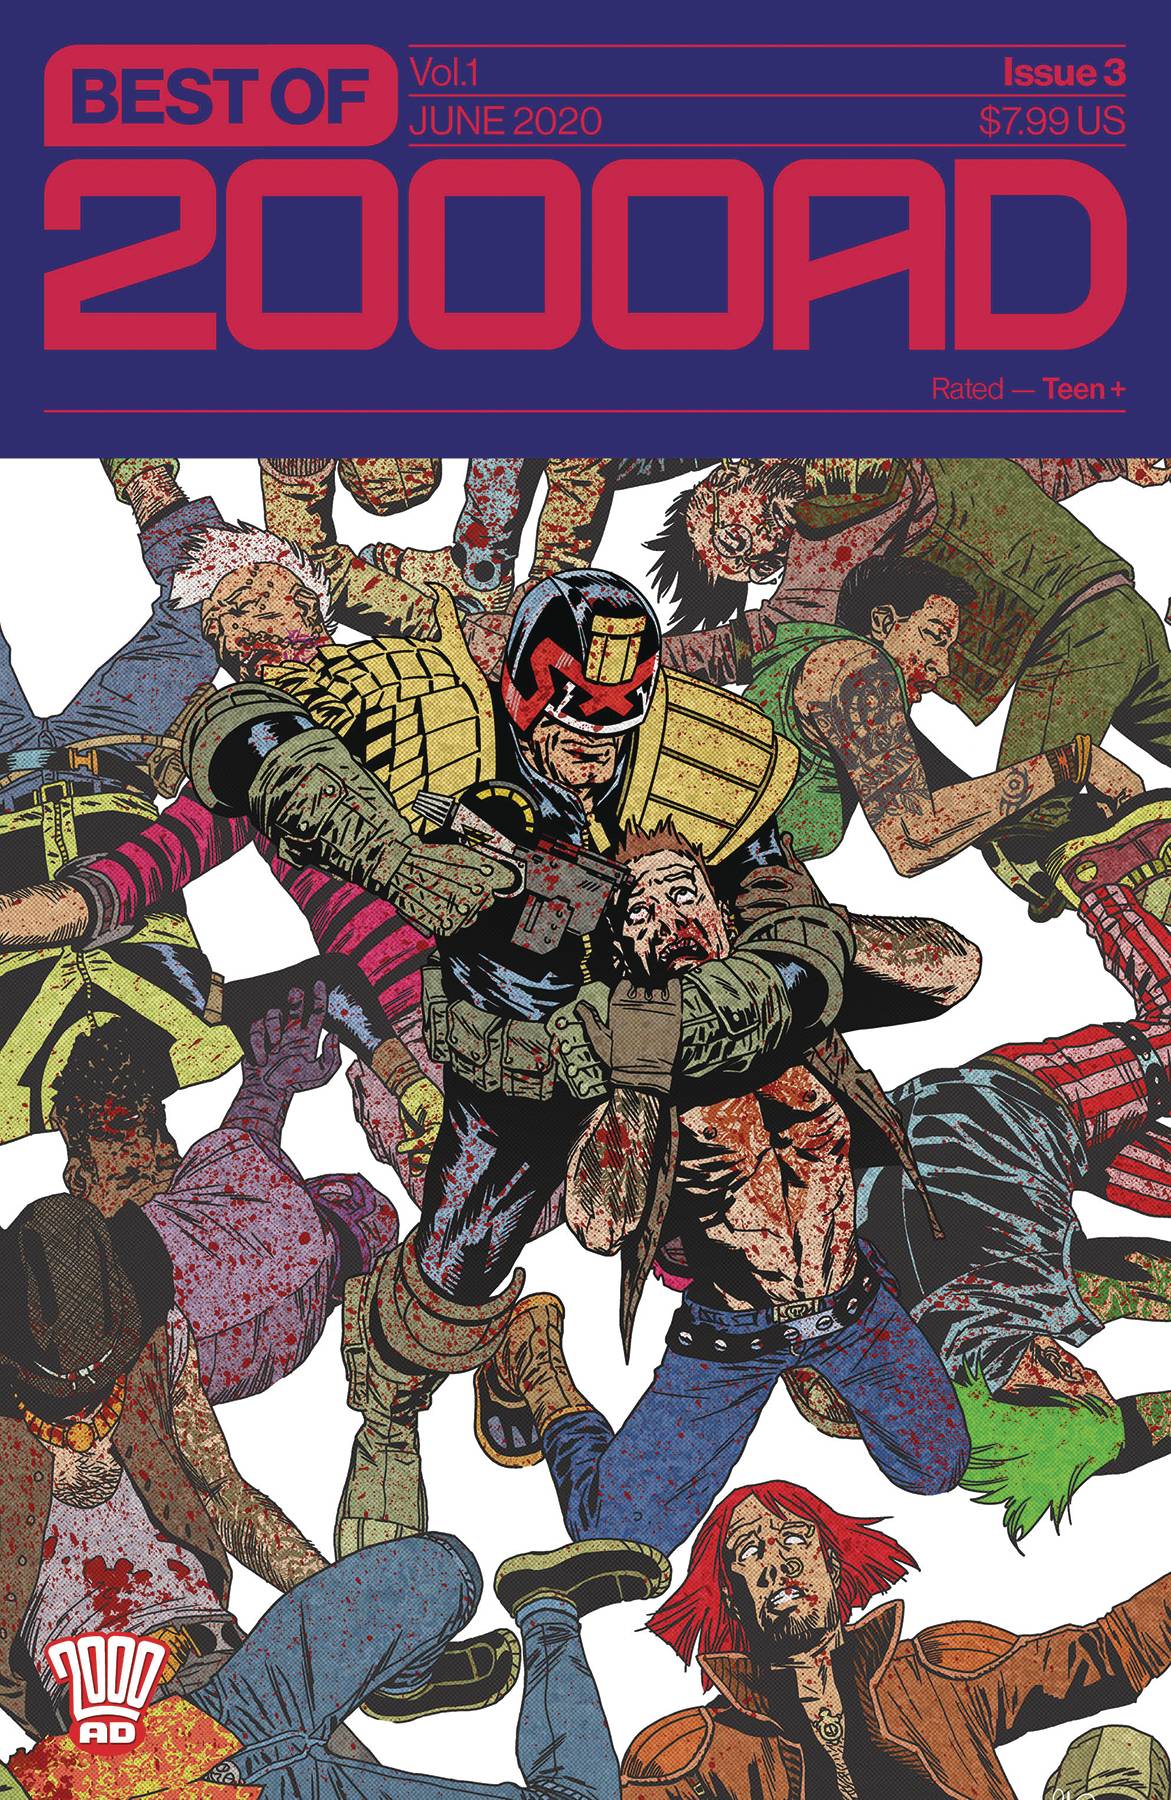 BEST OF 2000 AD #3